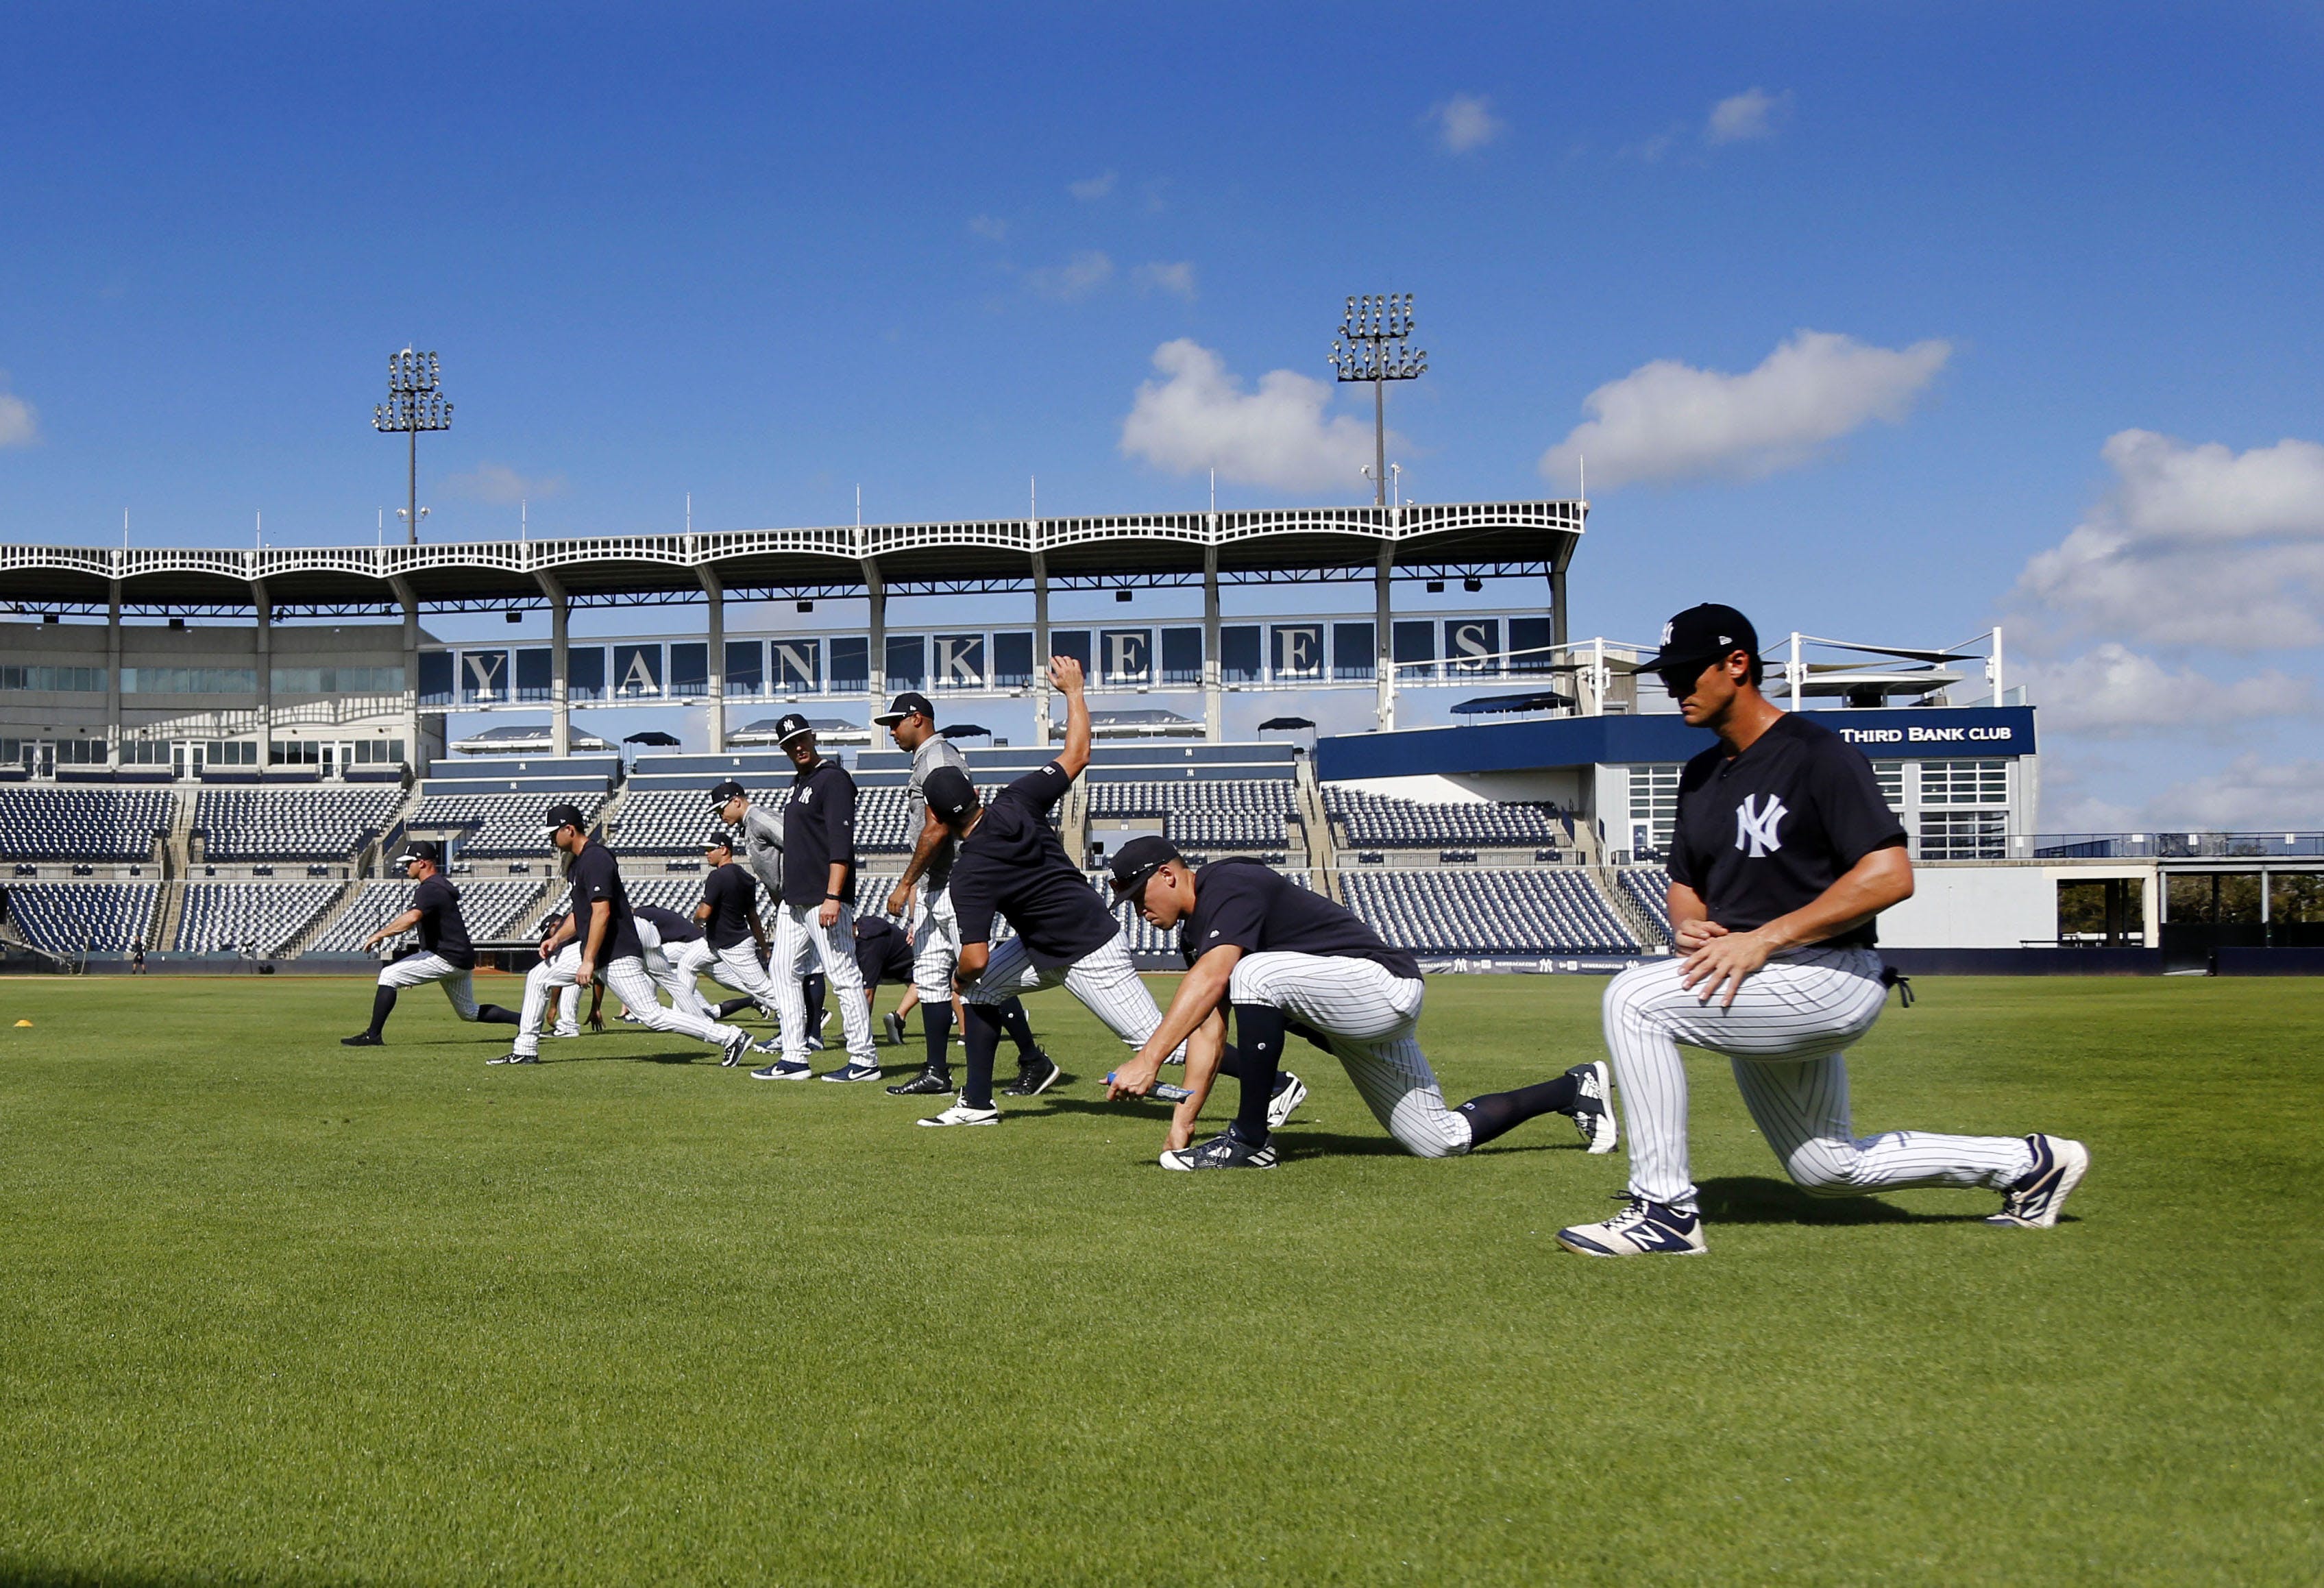 70 thoughts for all 70 players coming to Yankees spring training